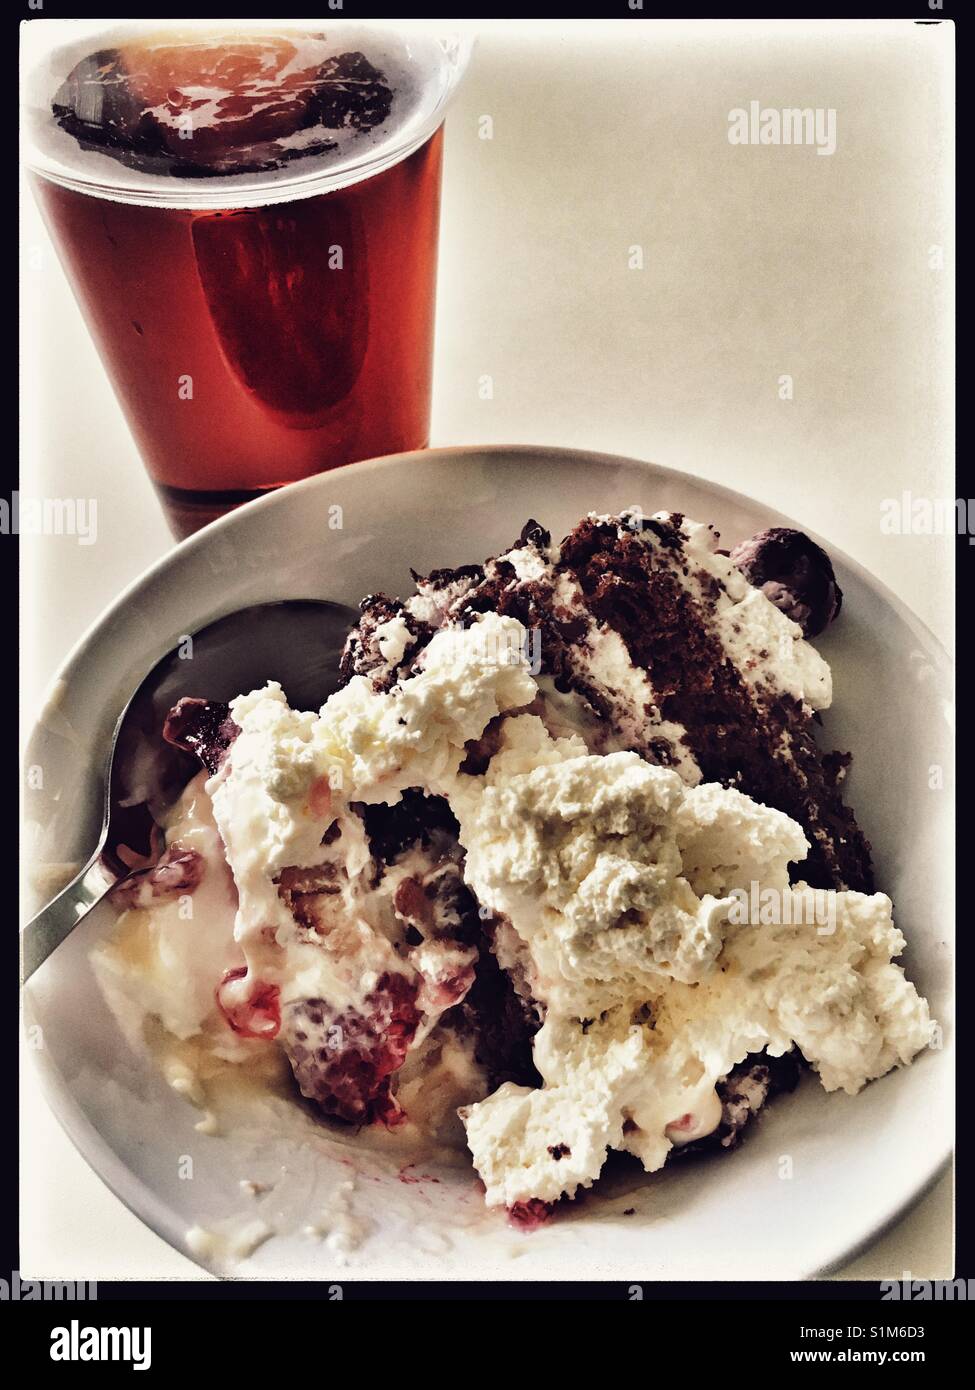 Black Forest Gateaux, Trifle and a pint of Bitter. Stock Photo